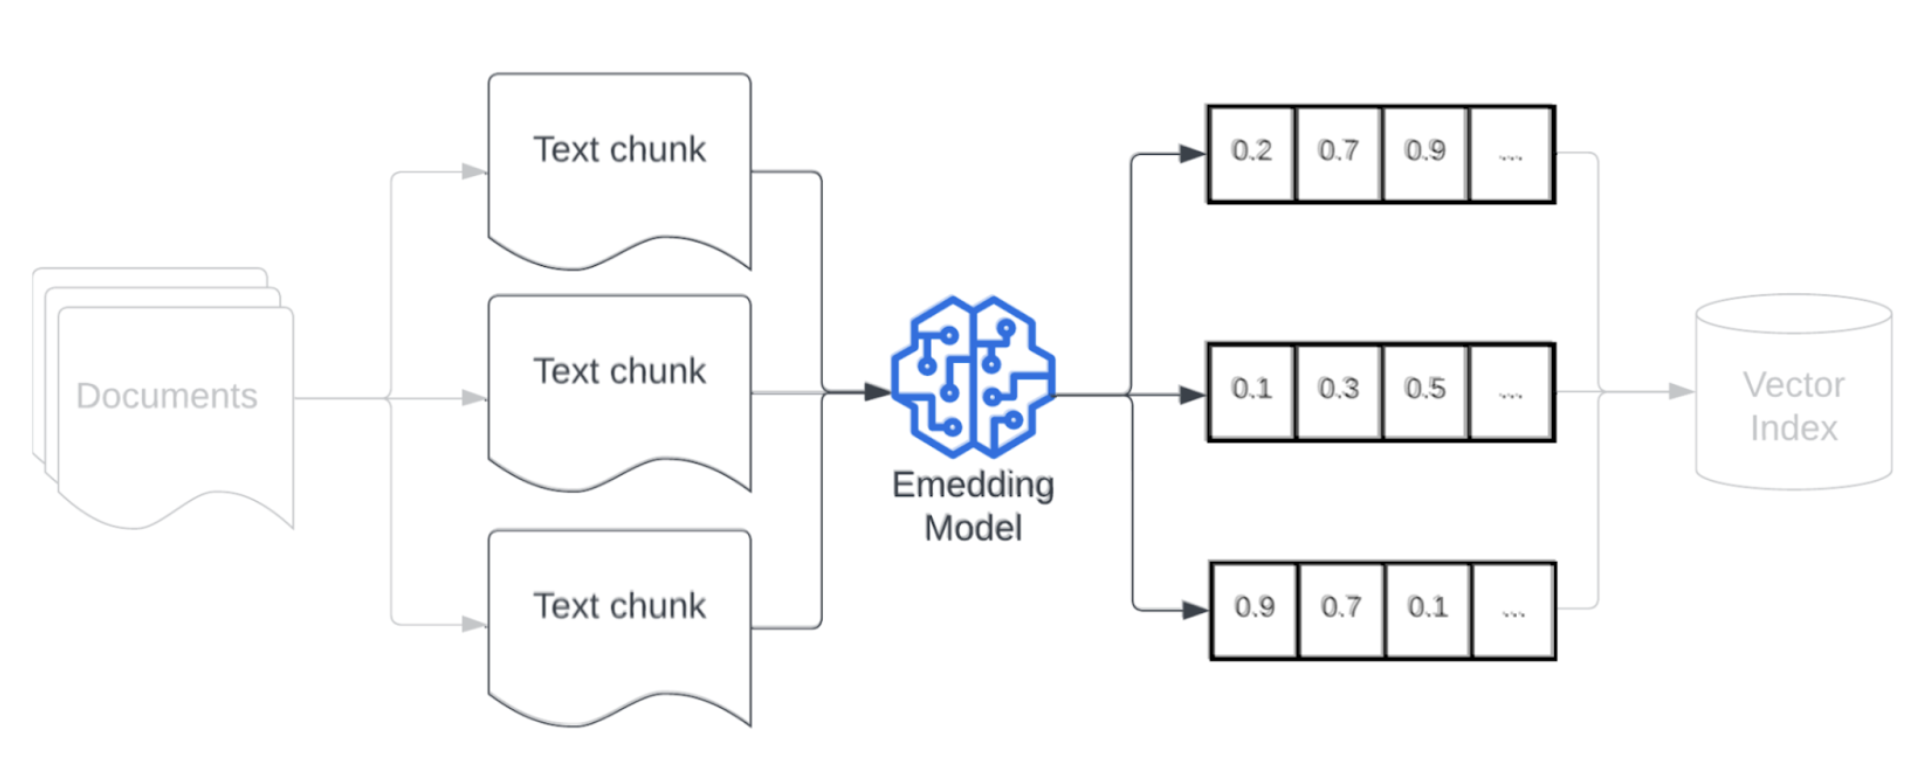 Diagram of how data chunks are vectorized based on semantic meaning.